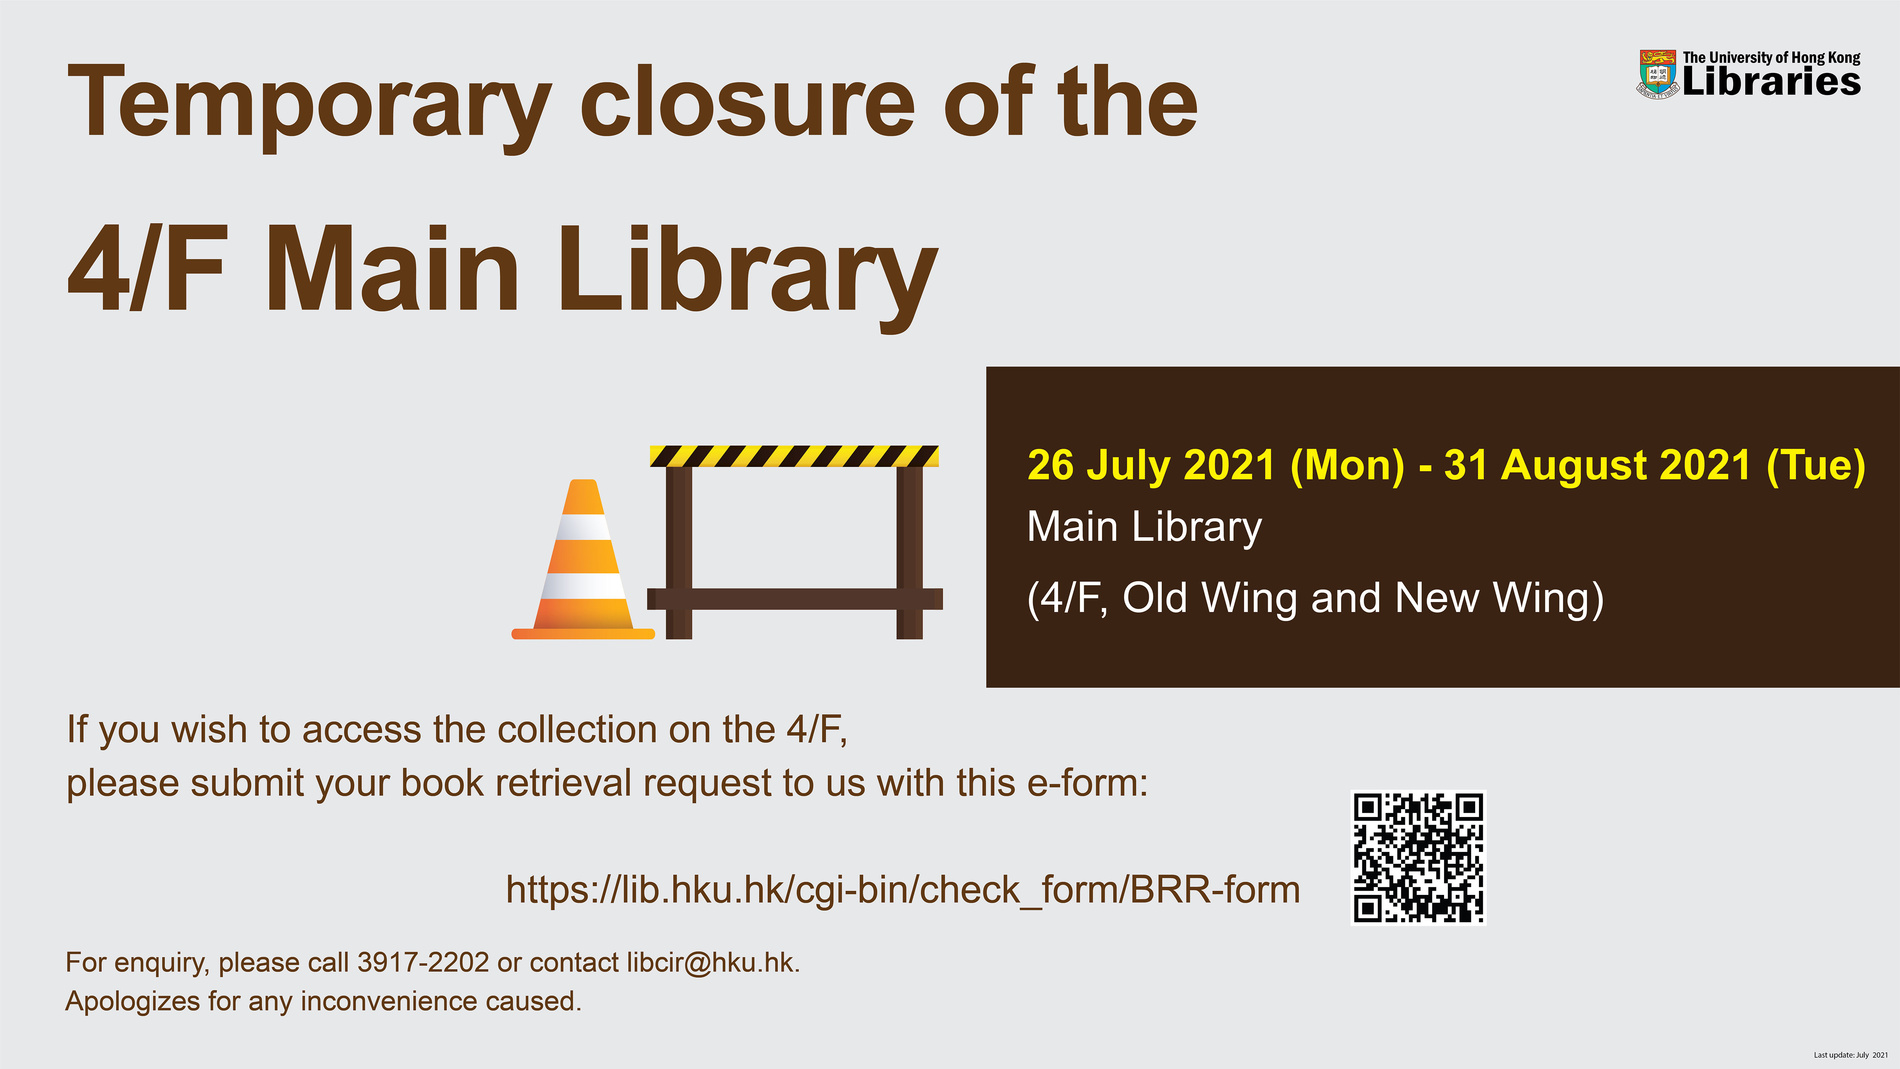 Temporary closure 4/F New Wing/Old Wing Main Library -  26 July - 31 August 2021